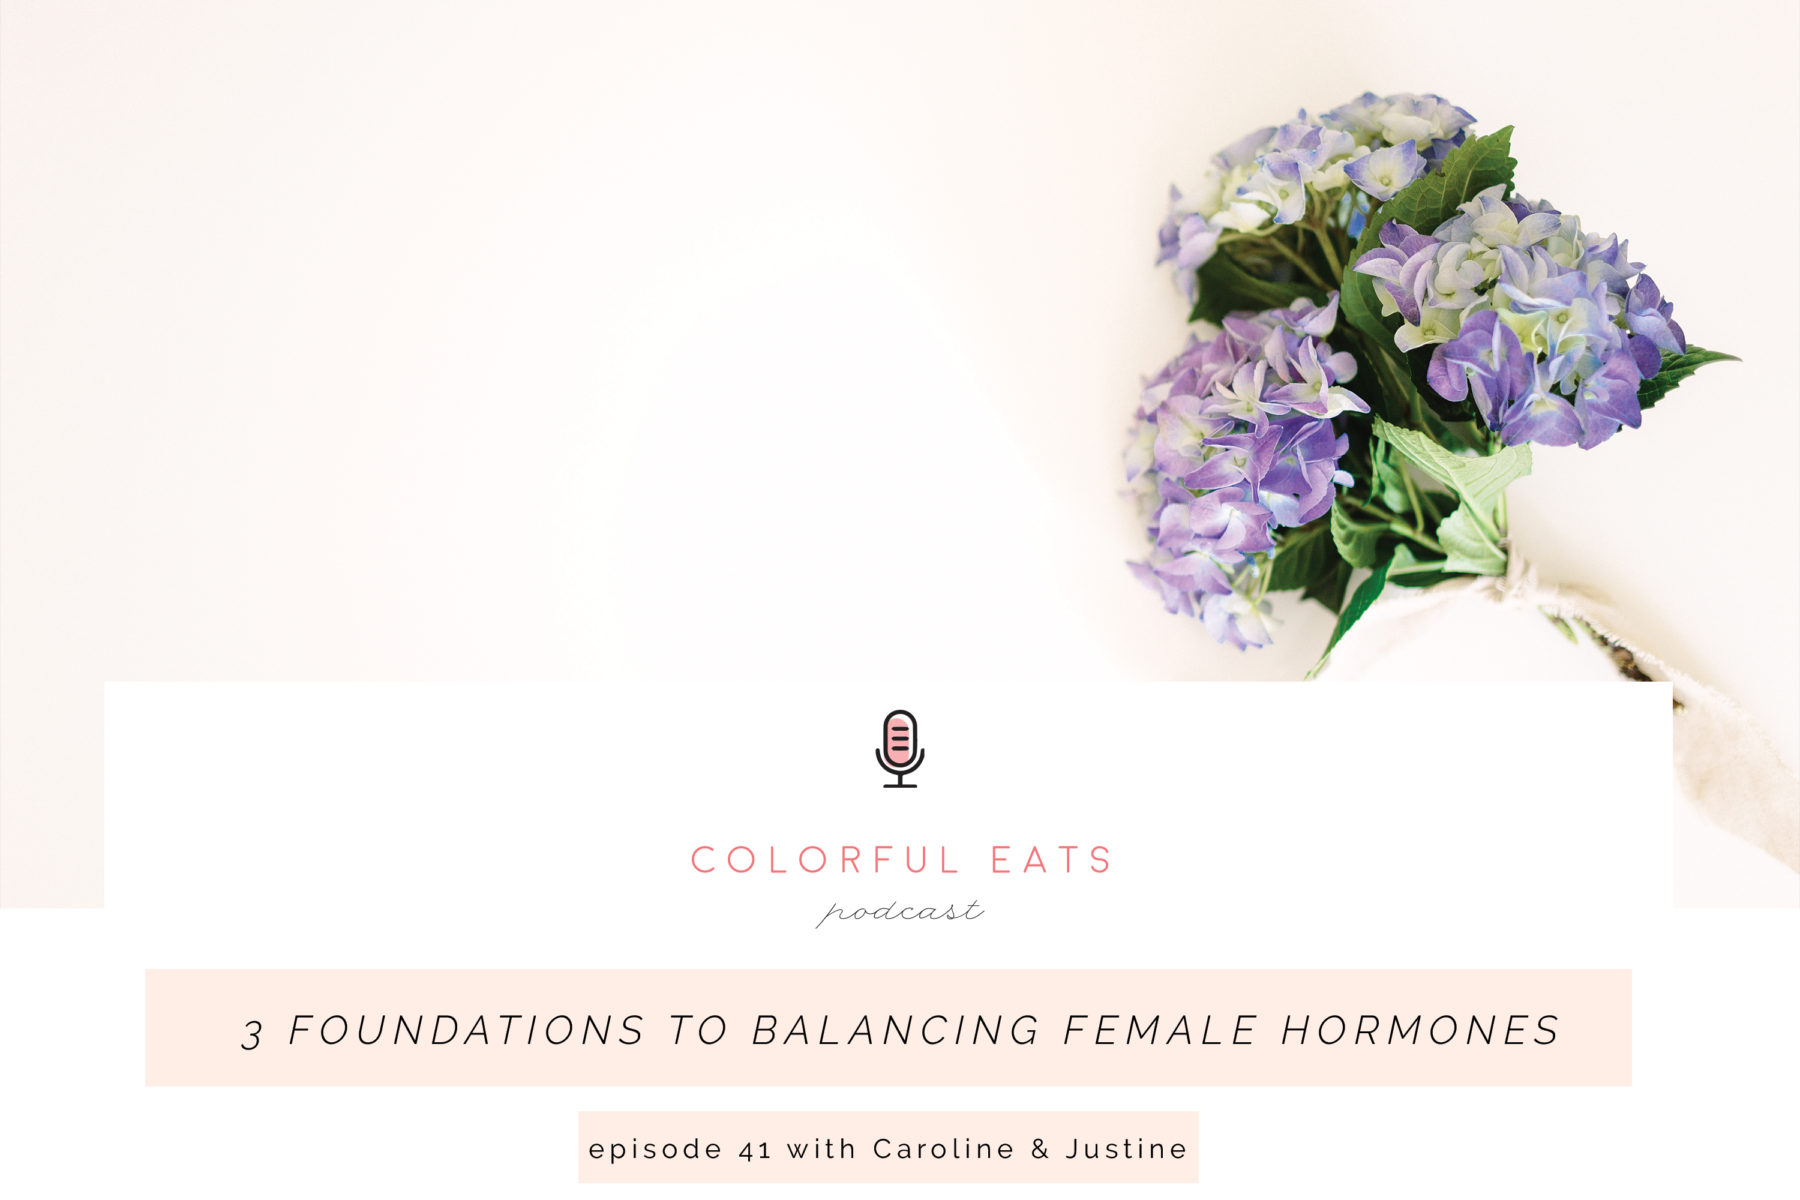 Colorful Eats Podcast Episode 41: 3 Foundations to Balancing Female Hormones